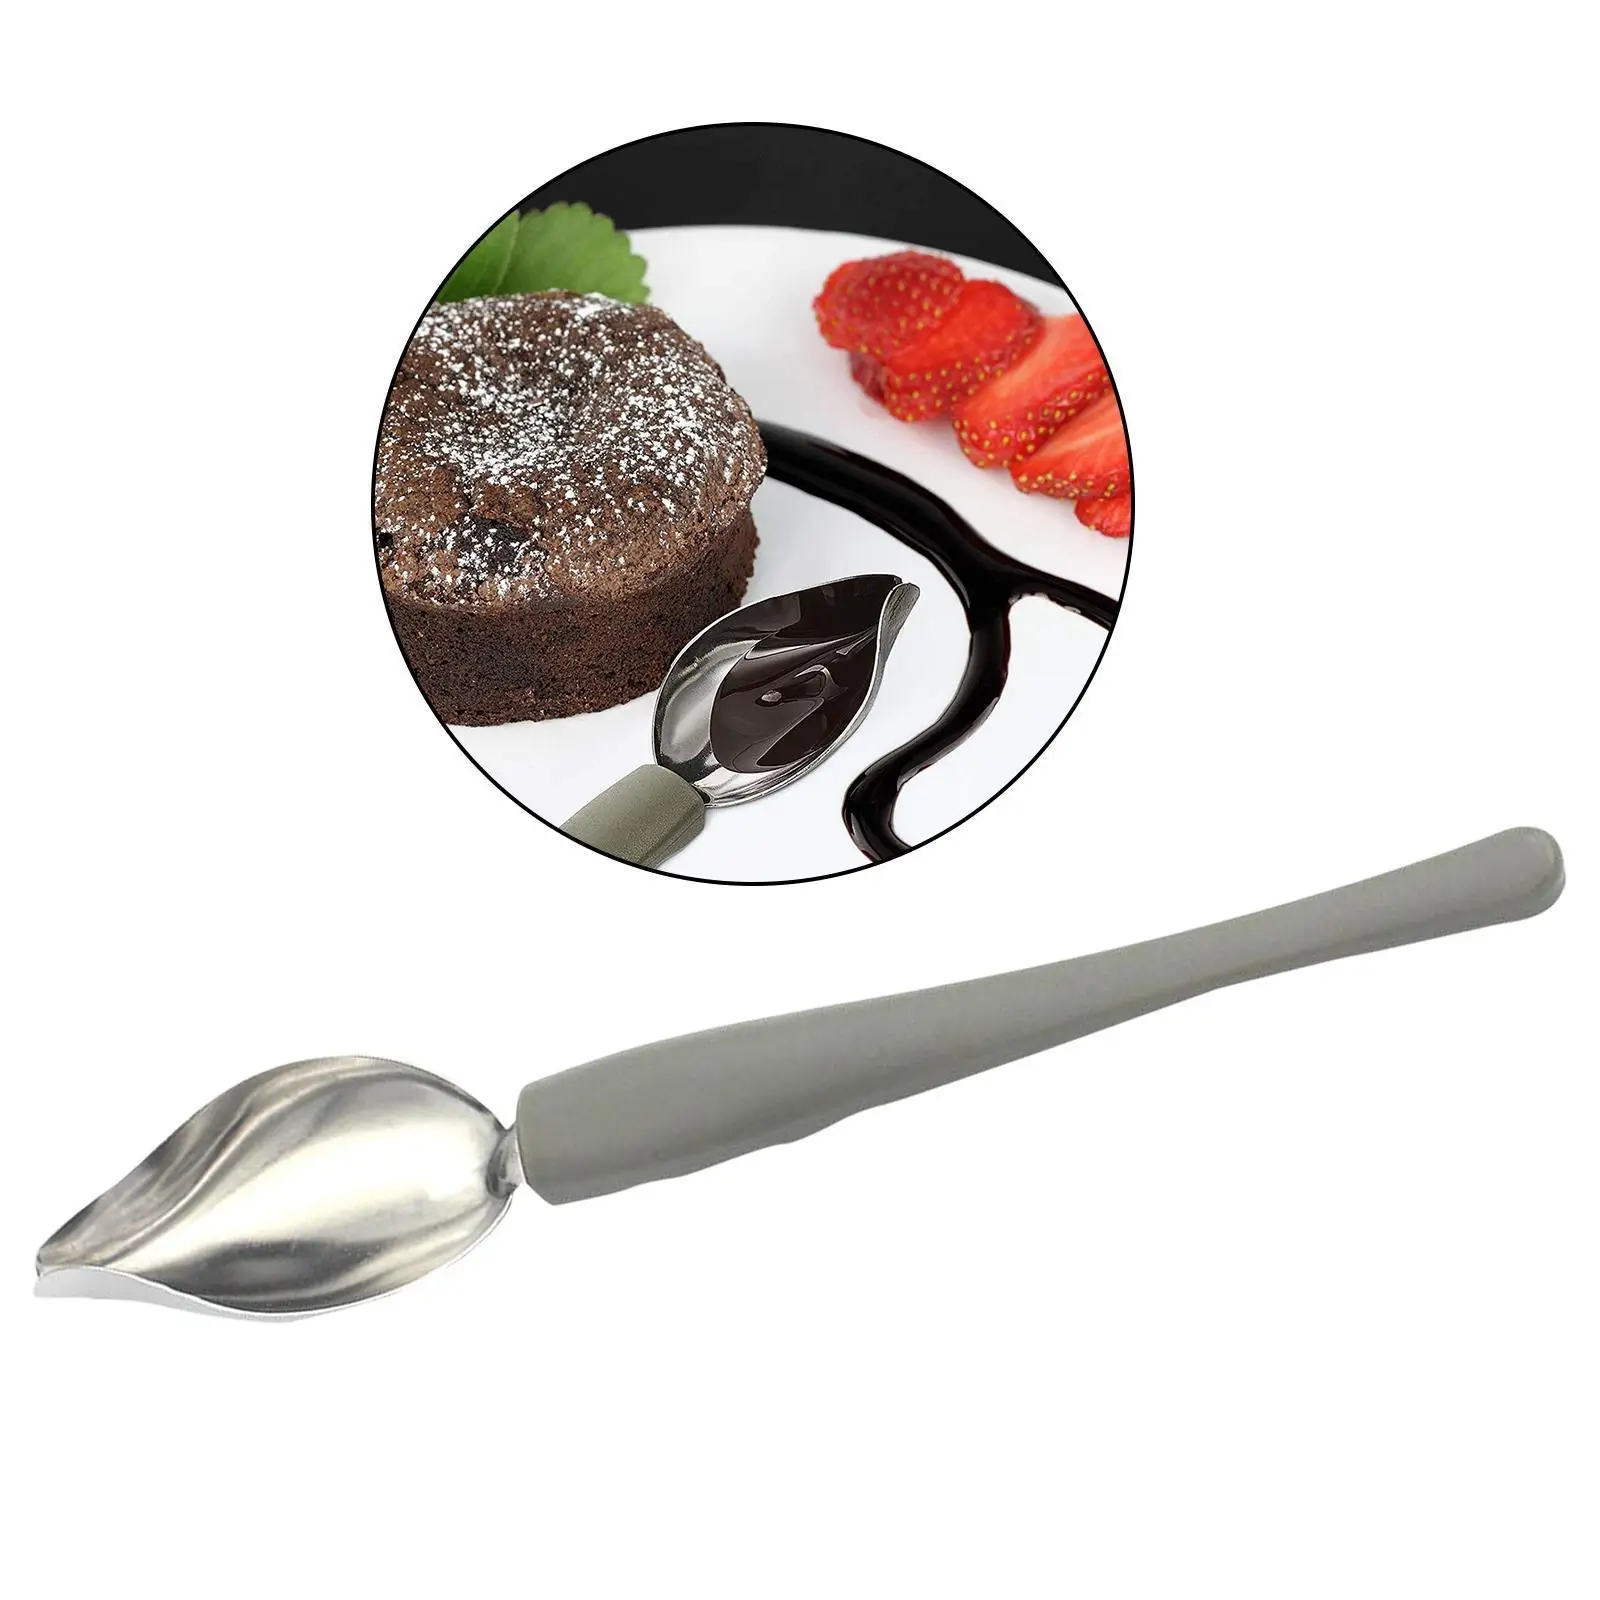 Chef Decorating Pencil Draw Tools Stainless Steel Portable Sauce Painting Dessert Coffee Spoon Kitchen Home Supplies